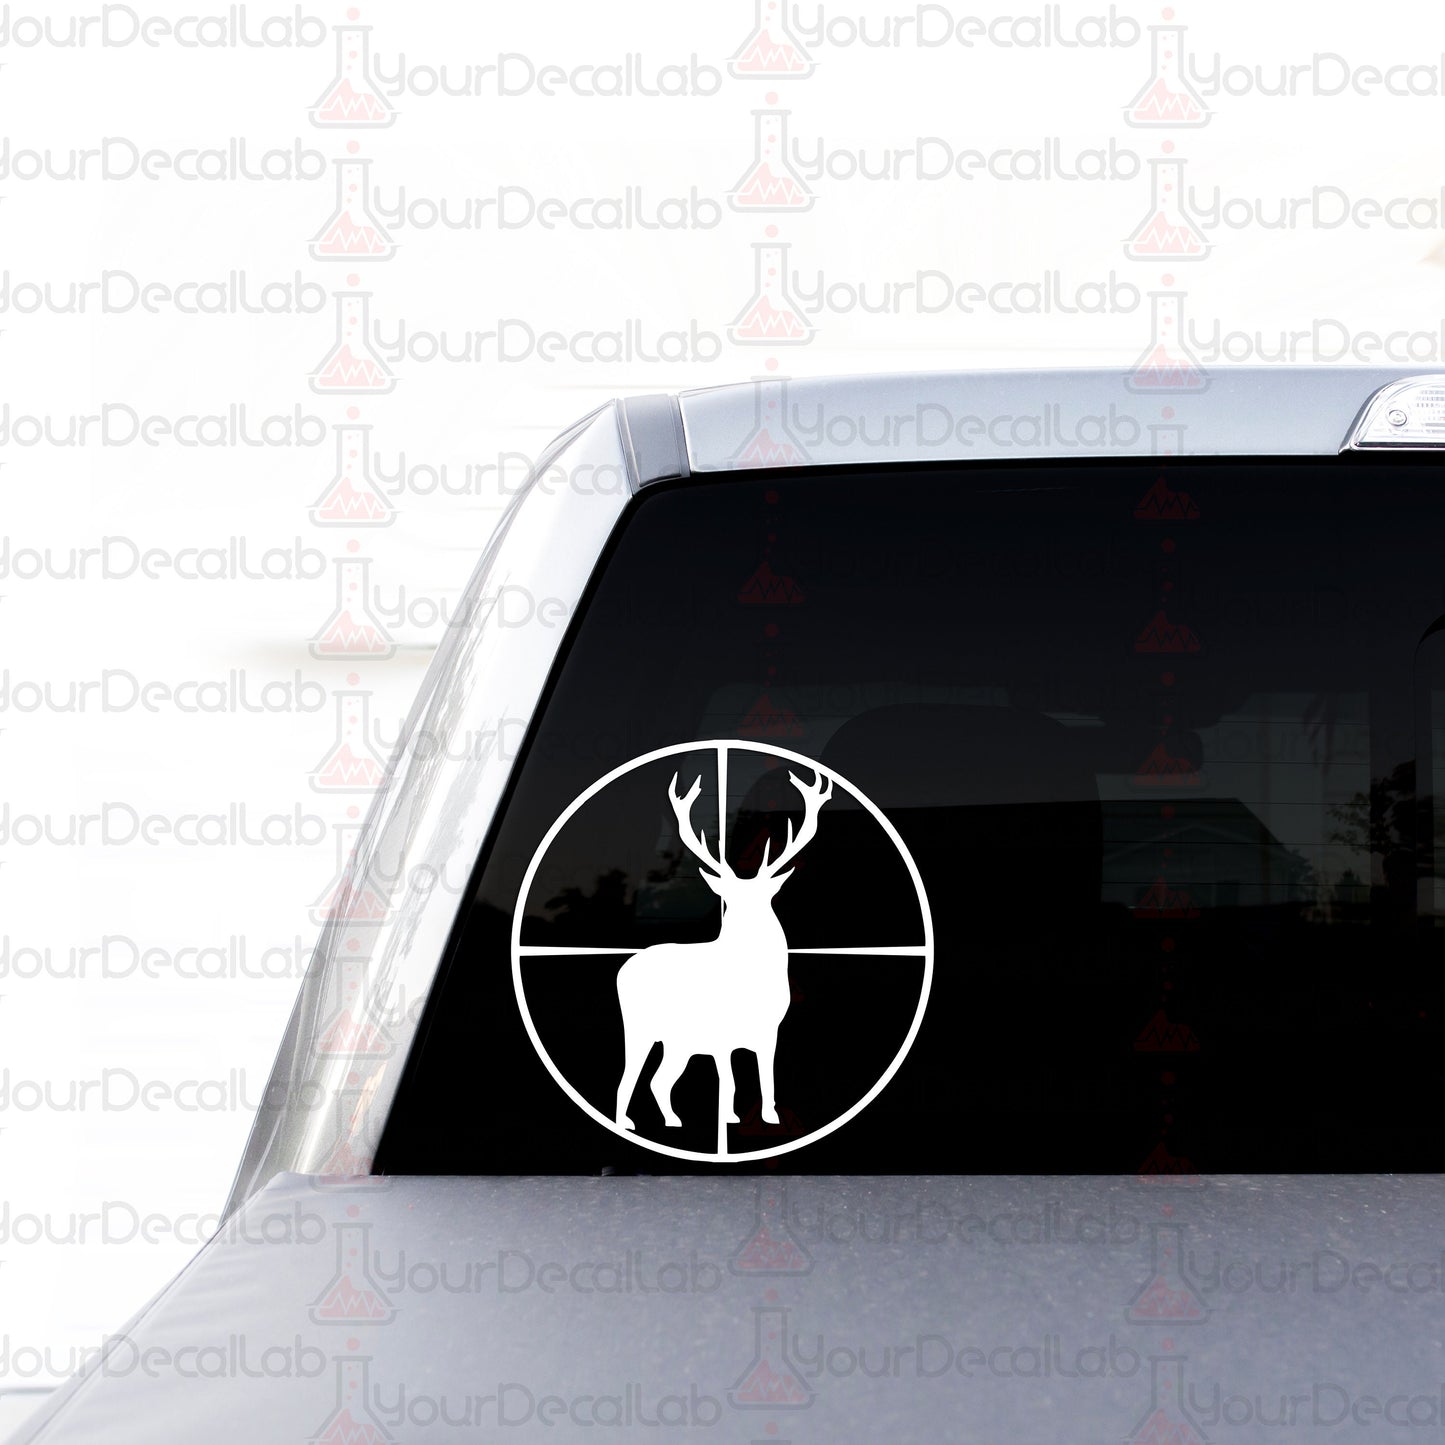 a sticker of a deer is shown on the back of a car